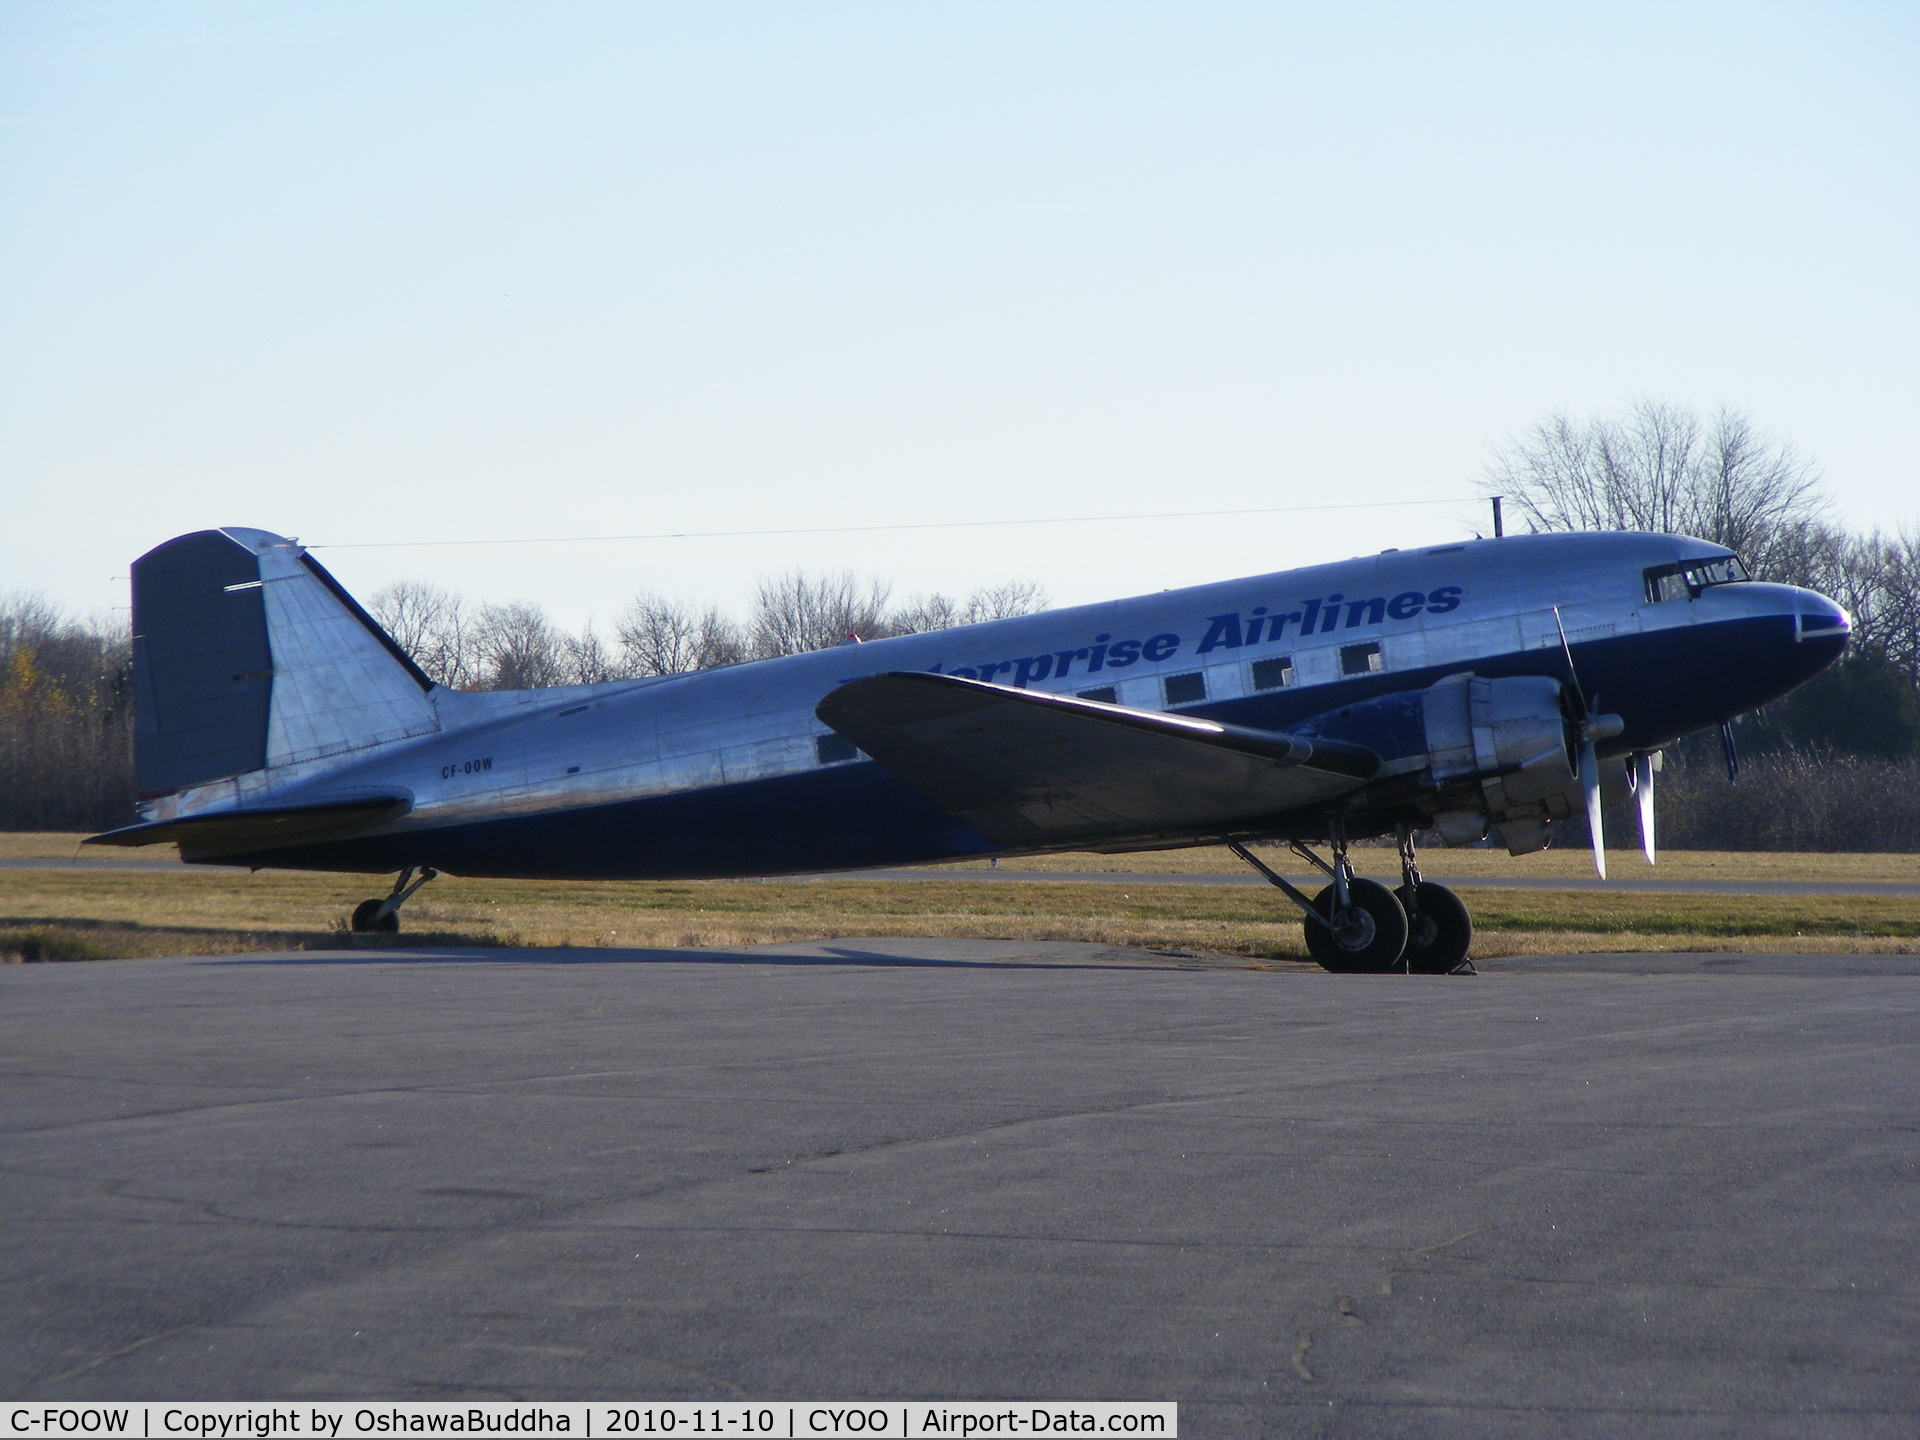 C-FOOW, 1942 Douglas DC3C-S1C3G (C-47A) C/N 13342, One of Enterprise Air's beautiful old piston-pounders!